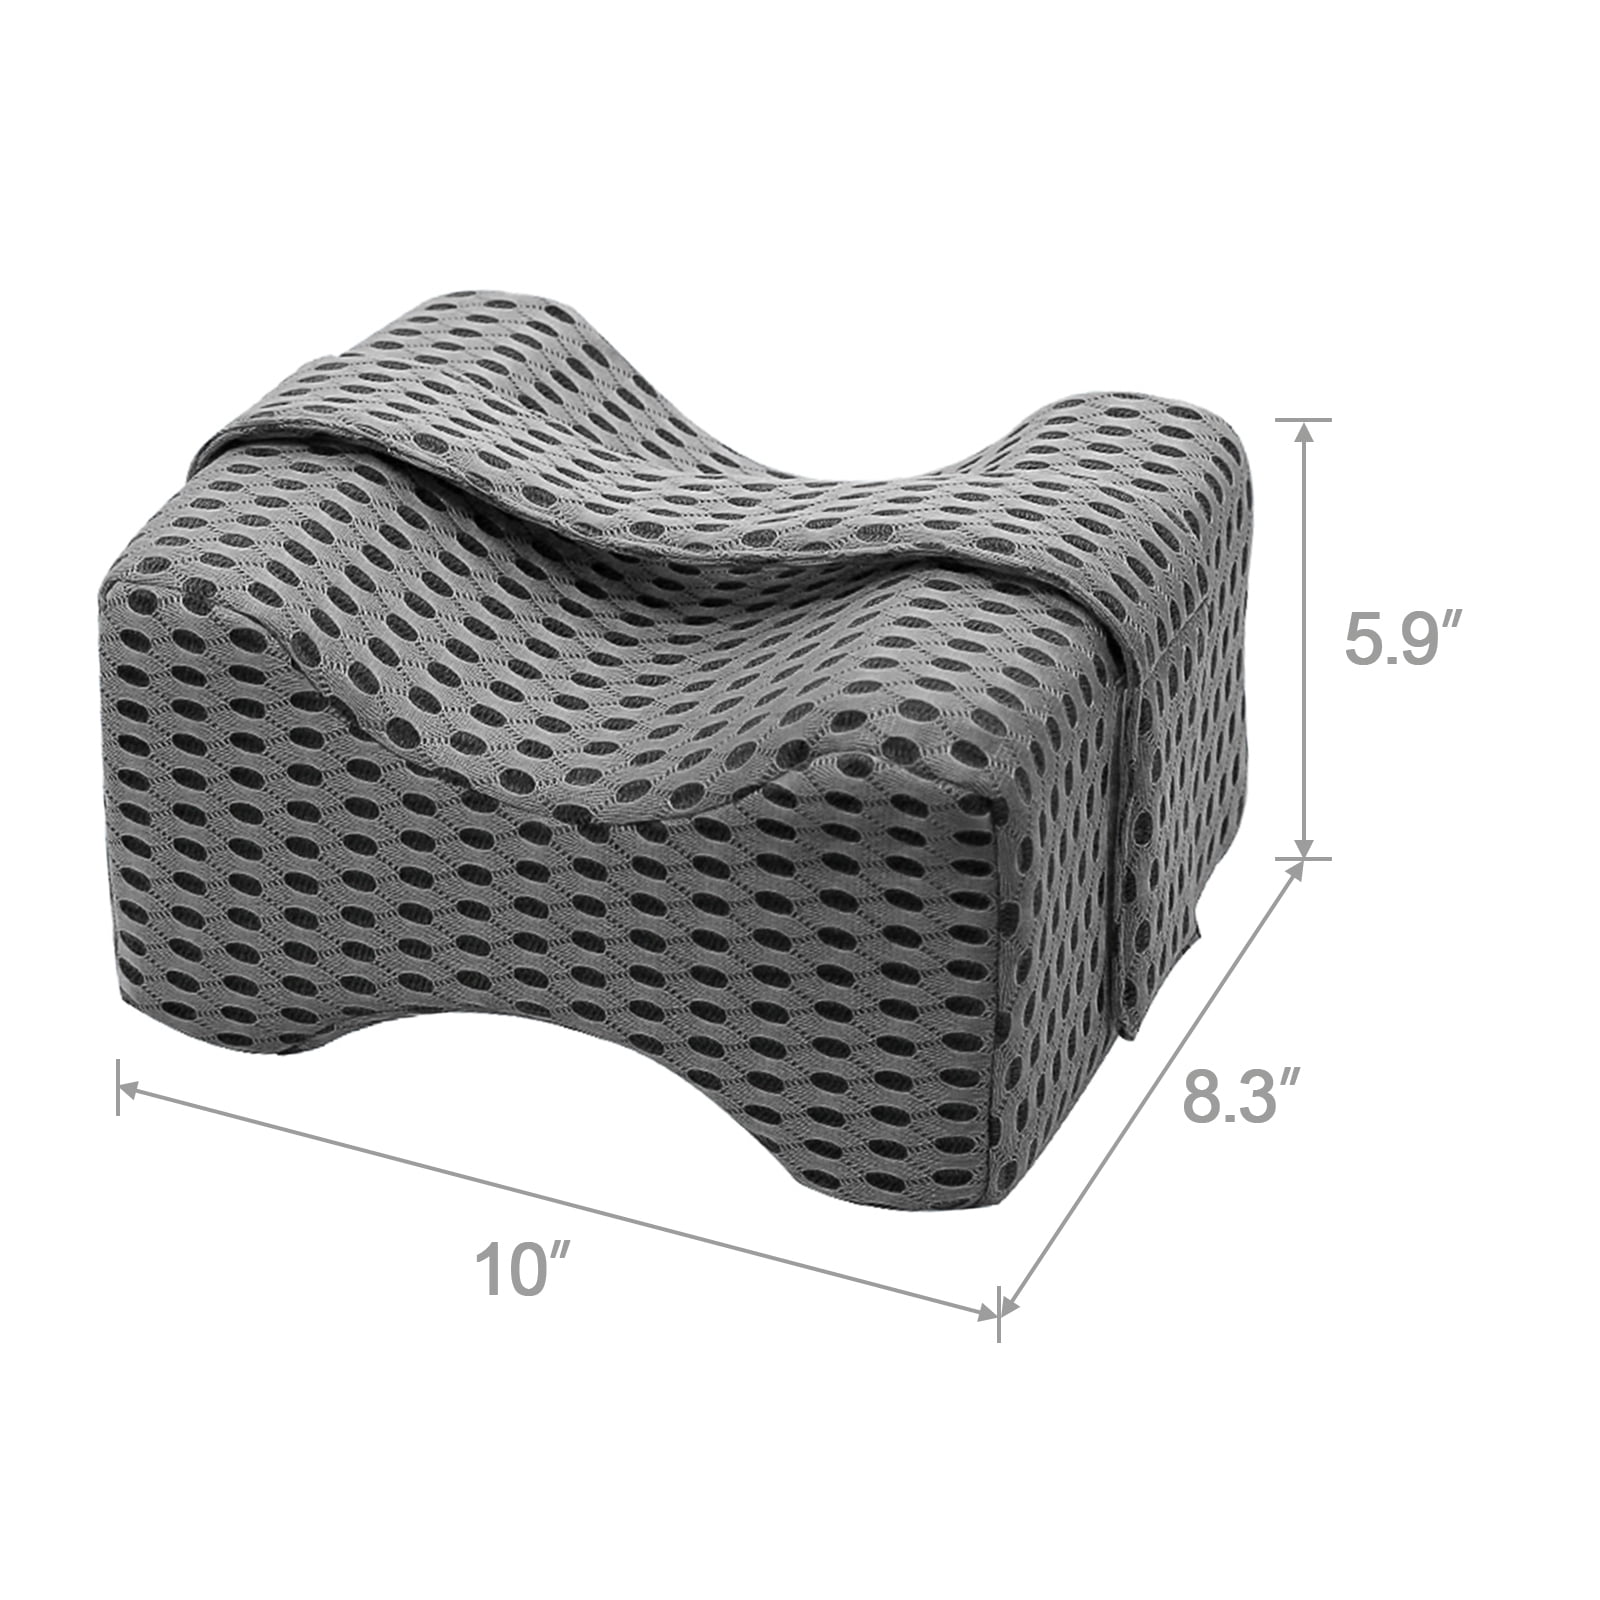 Memory Foam Wedge Knee Pillow For Pregnancy, Travel & Pain Relief  Multifunctional Leg Cushion With Slow Rebound Technology From Kingflower,  $13.47